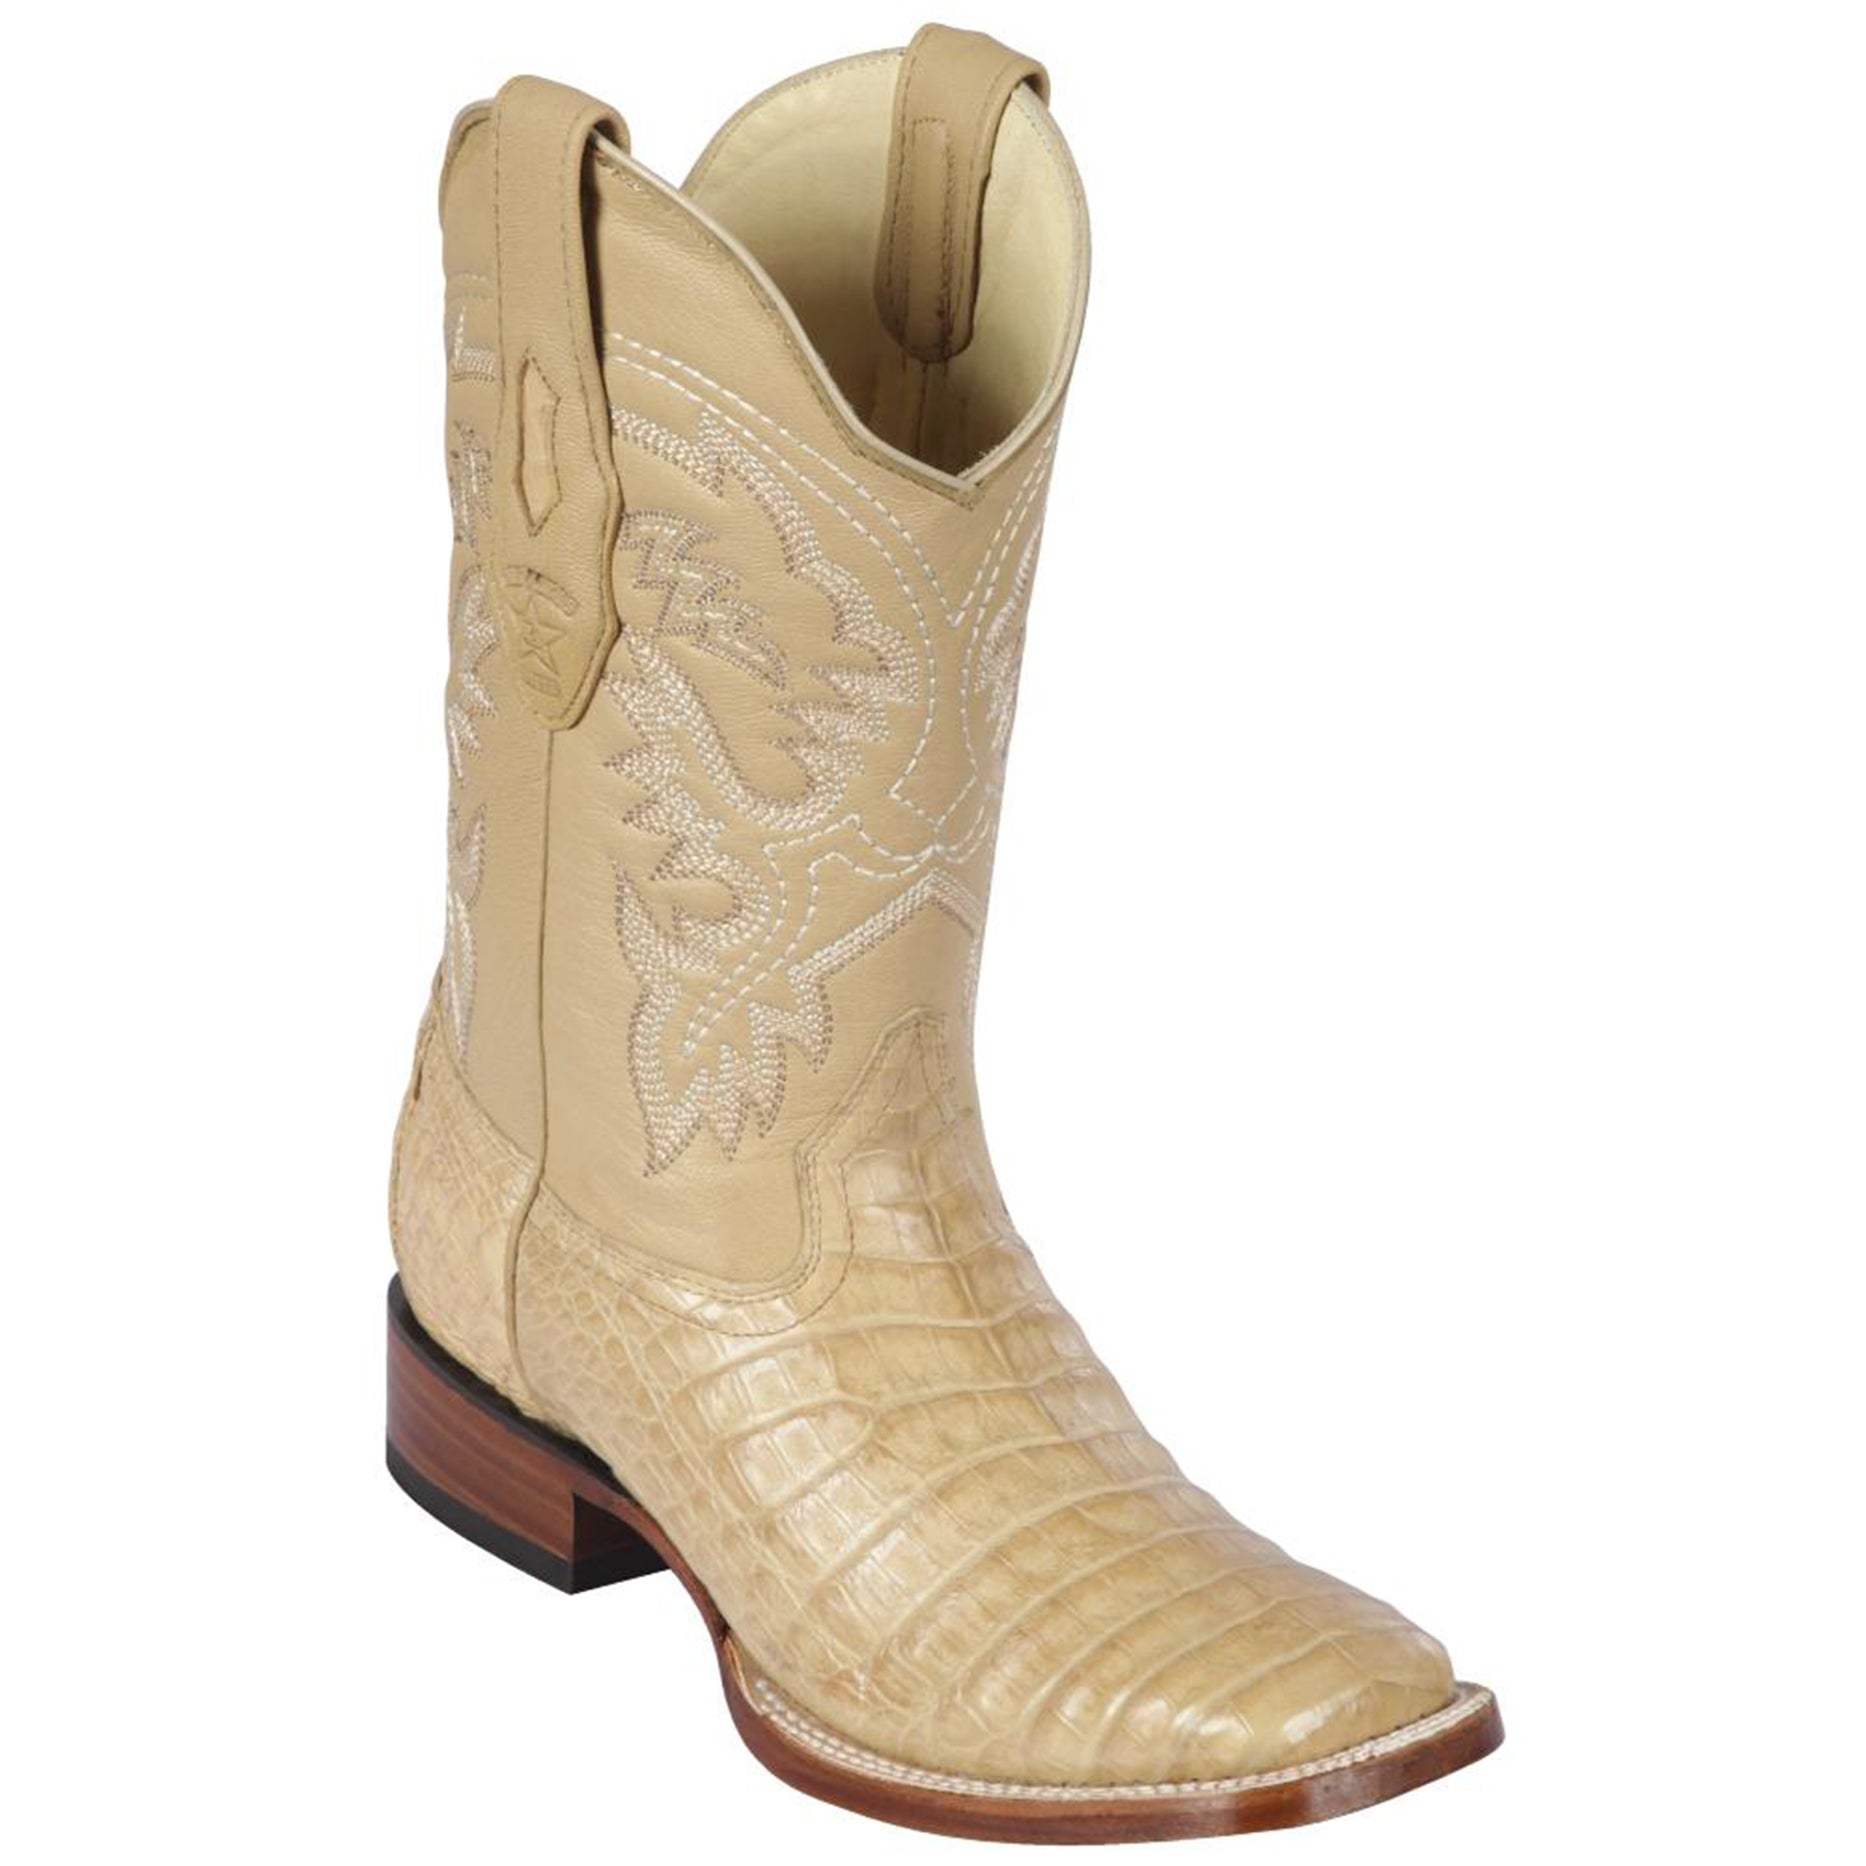 Caiman Belly Oryx Square Toe Cowboy Boots